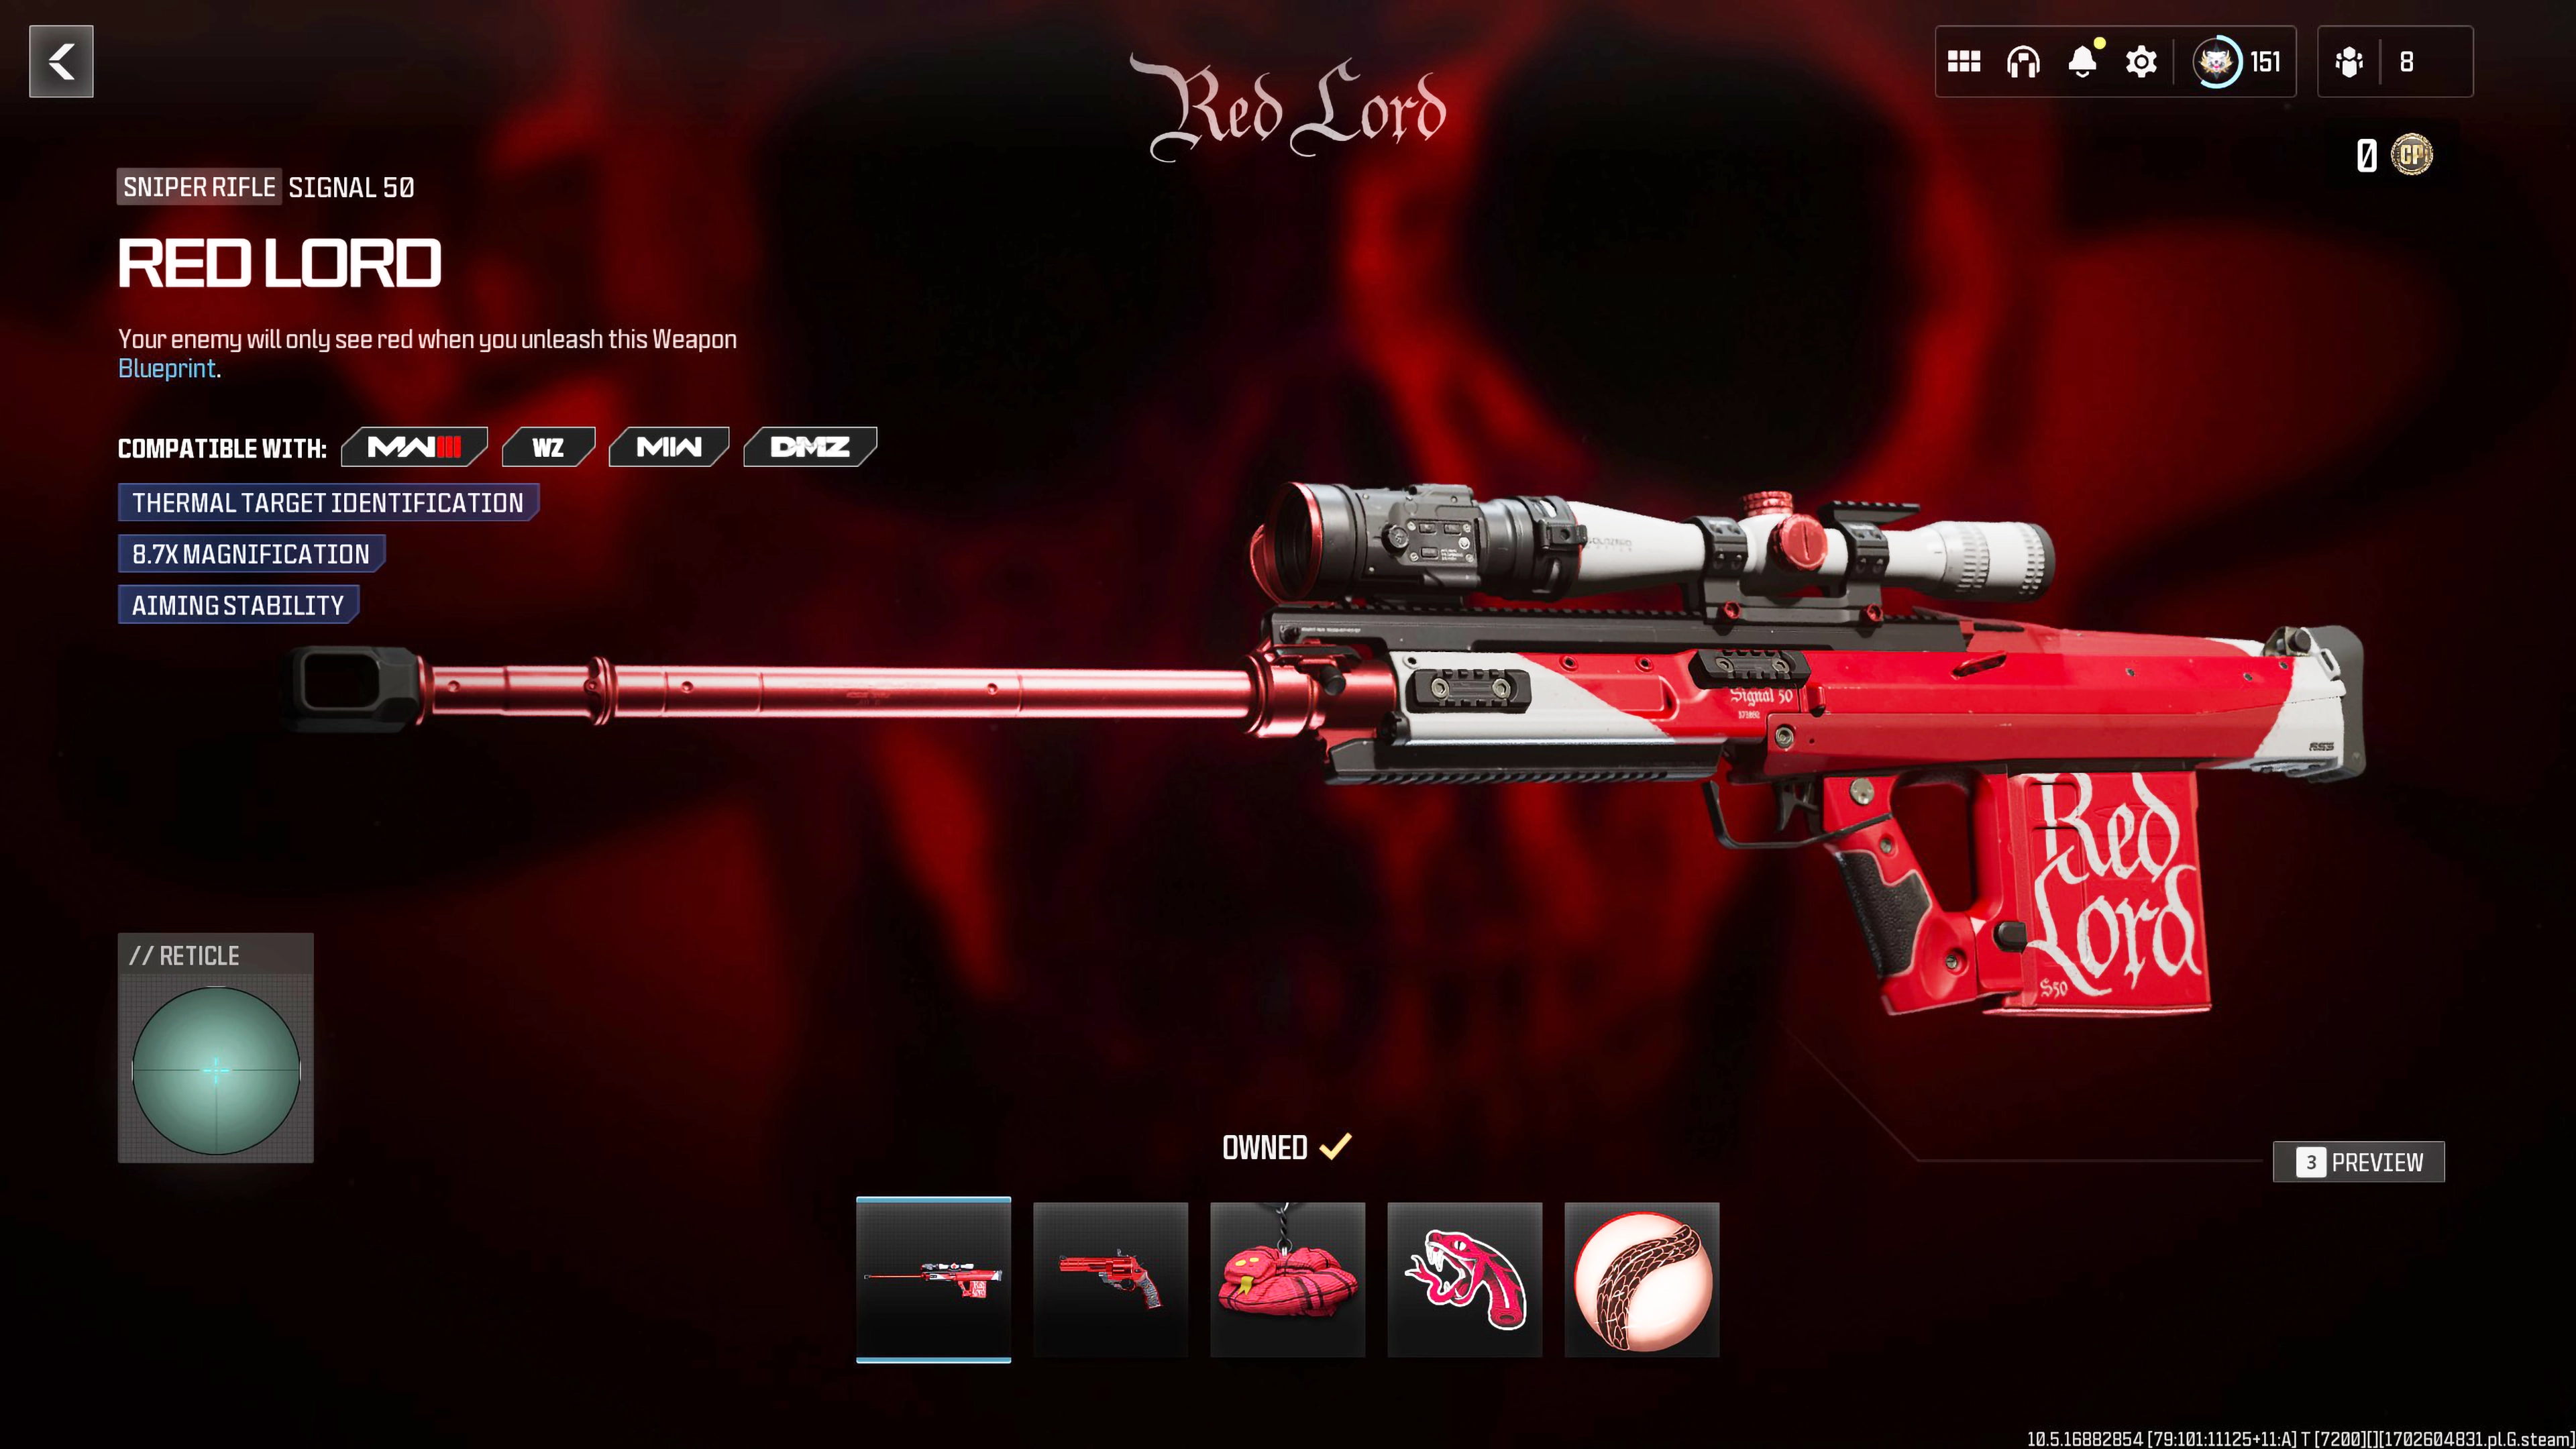 RED LORD Weapon Bundle Hard Unlocked PS XBOX PC - Ultra Rare